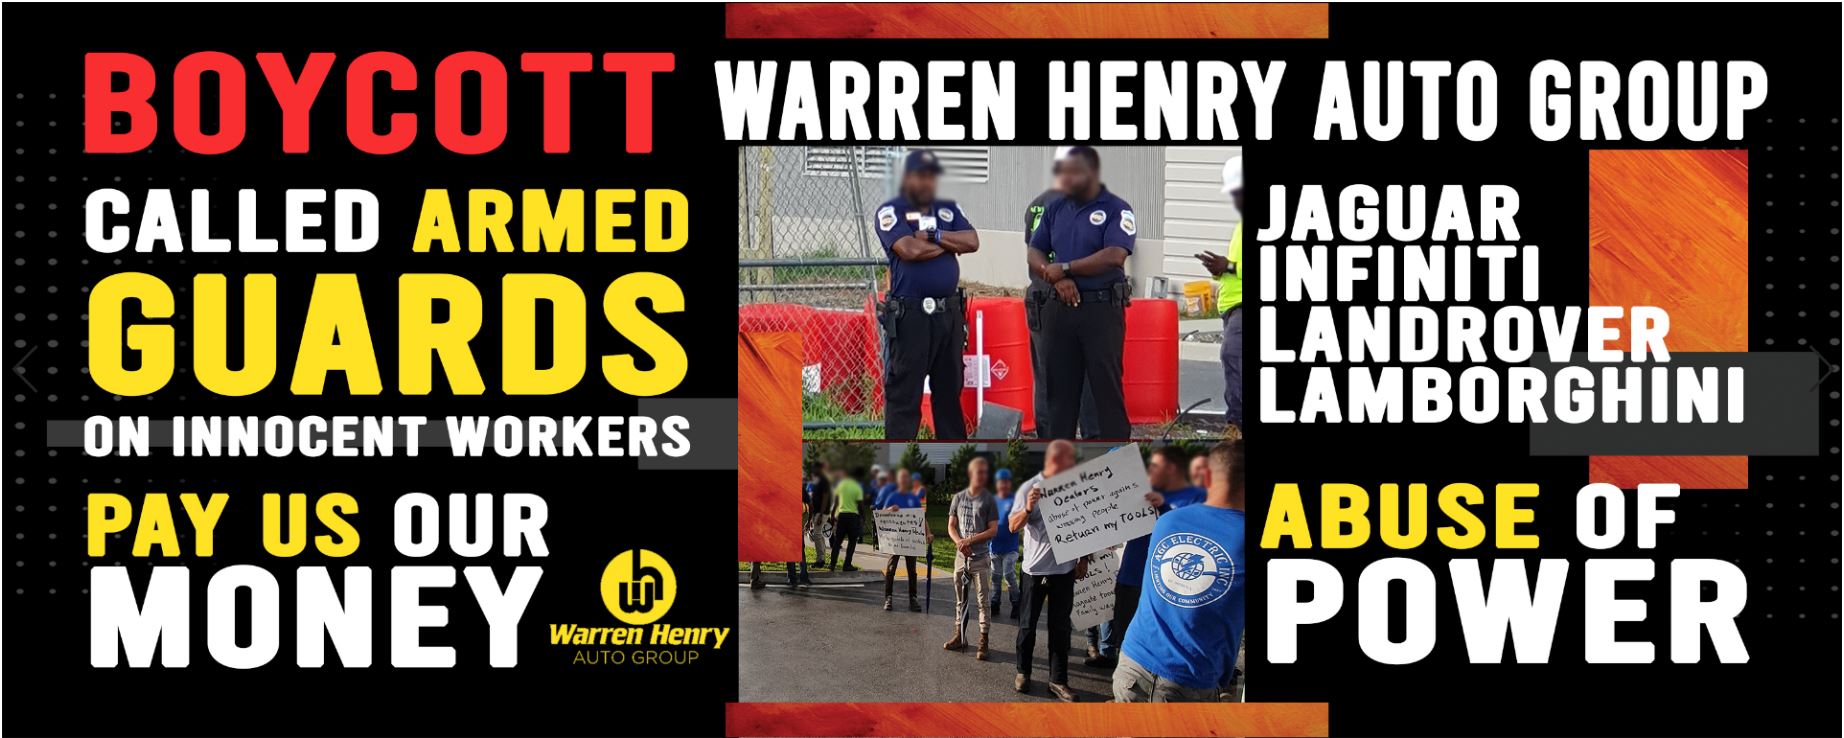 Warren Henry Auto Group Abuse of Power